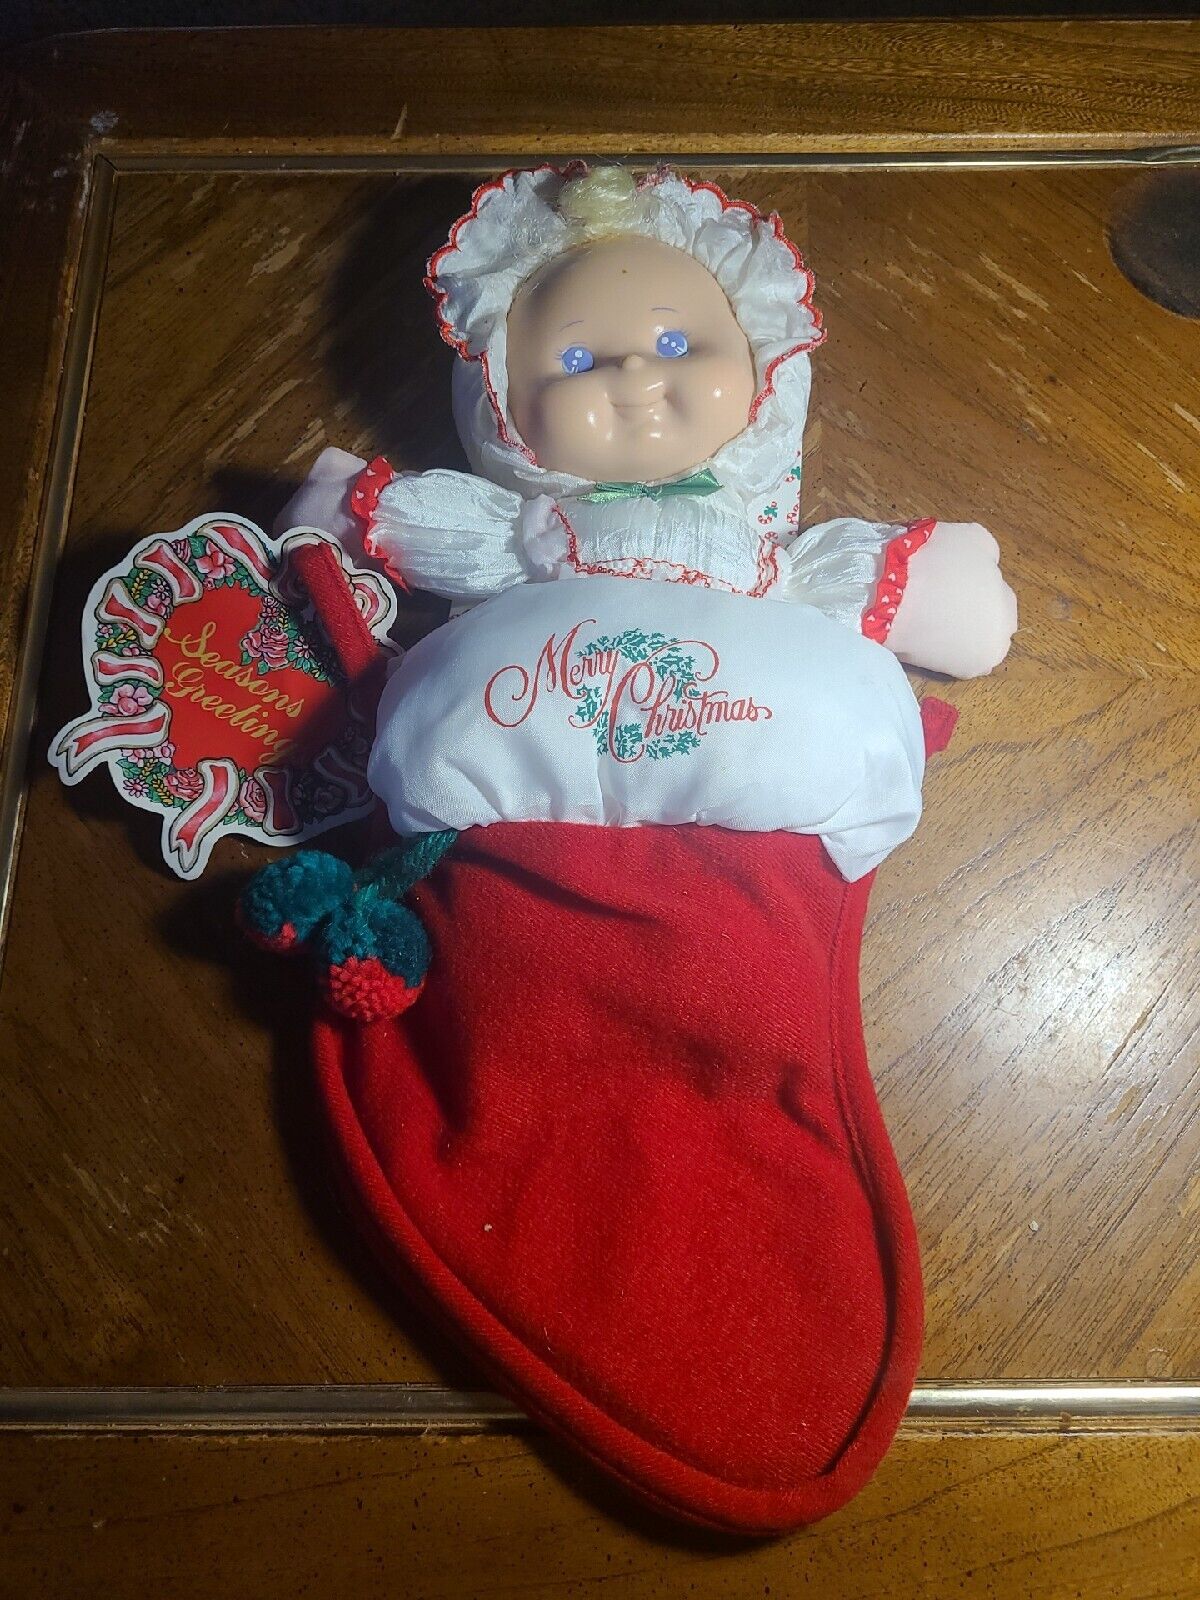 1991 WELL-MADE TOY MF'G CORP Merry Christmas BabyDoll In A Stocking Vintage RARE